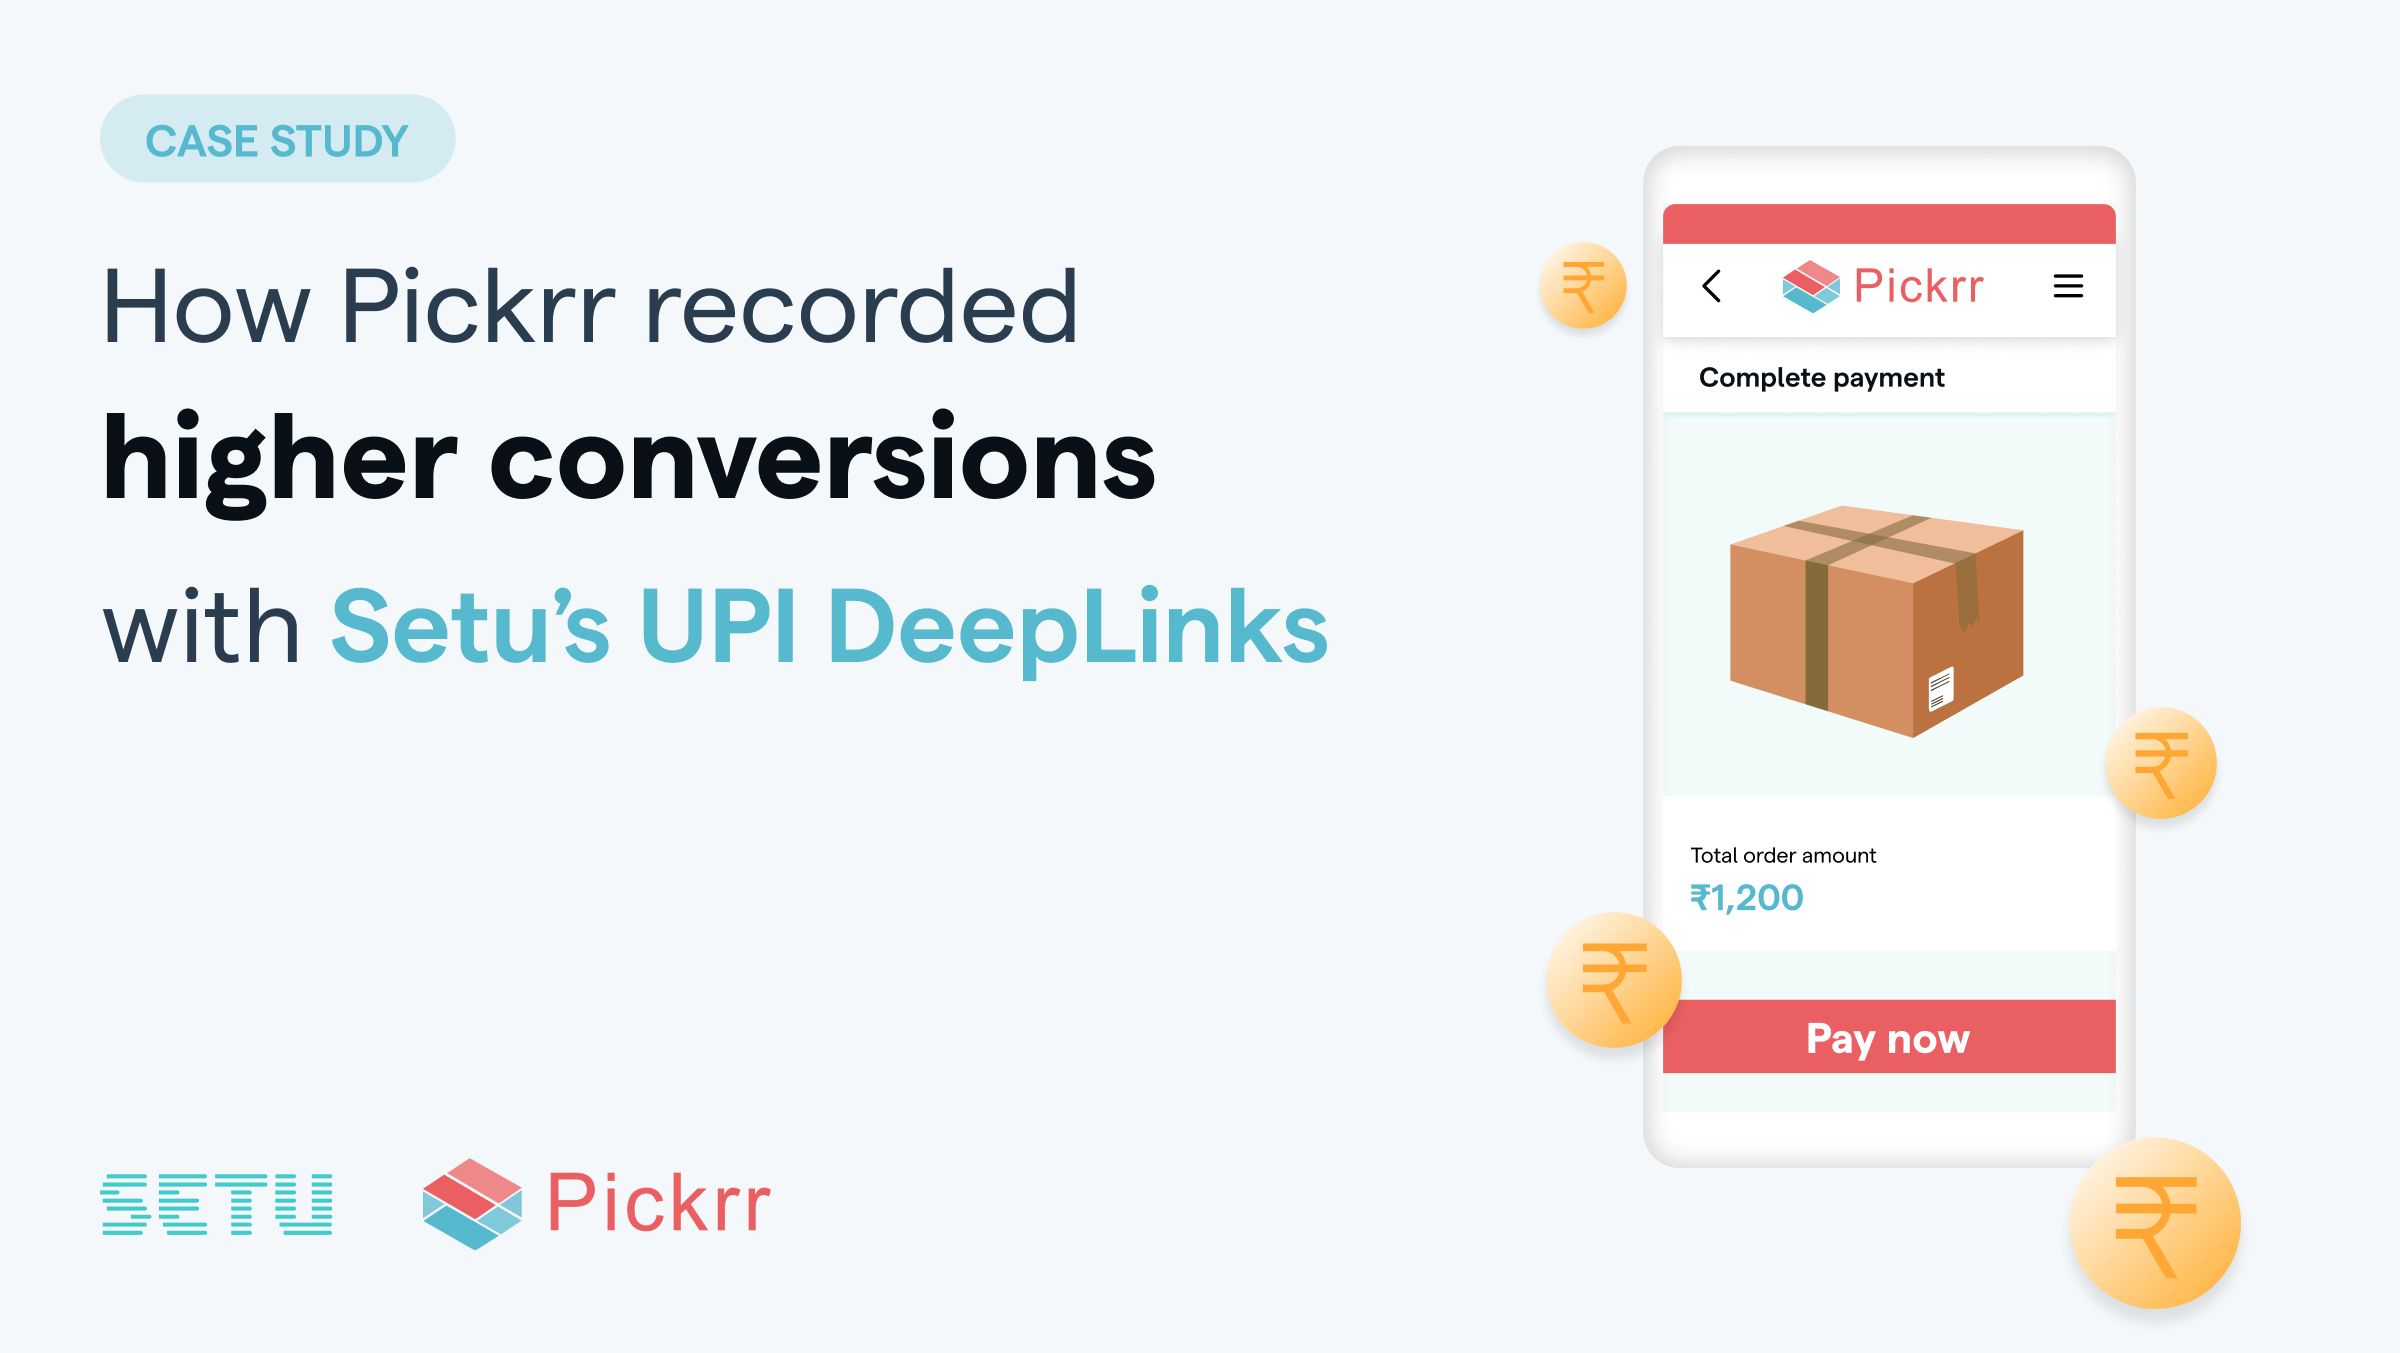 How Pickrr recorded higher conversions with Setu's UPI DeepLinks title image